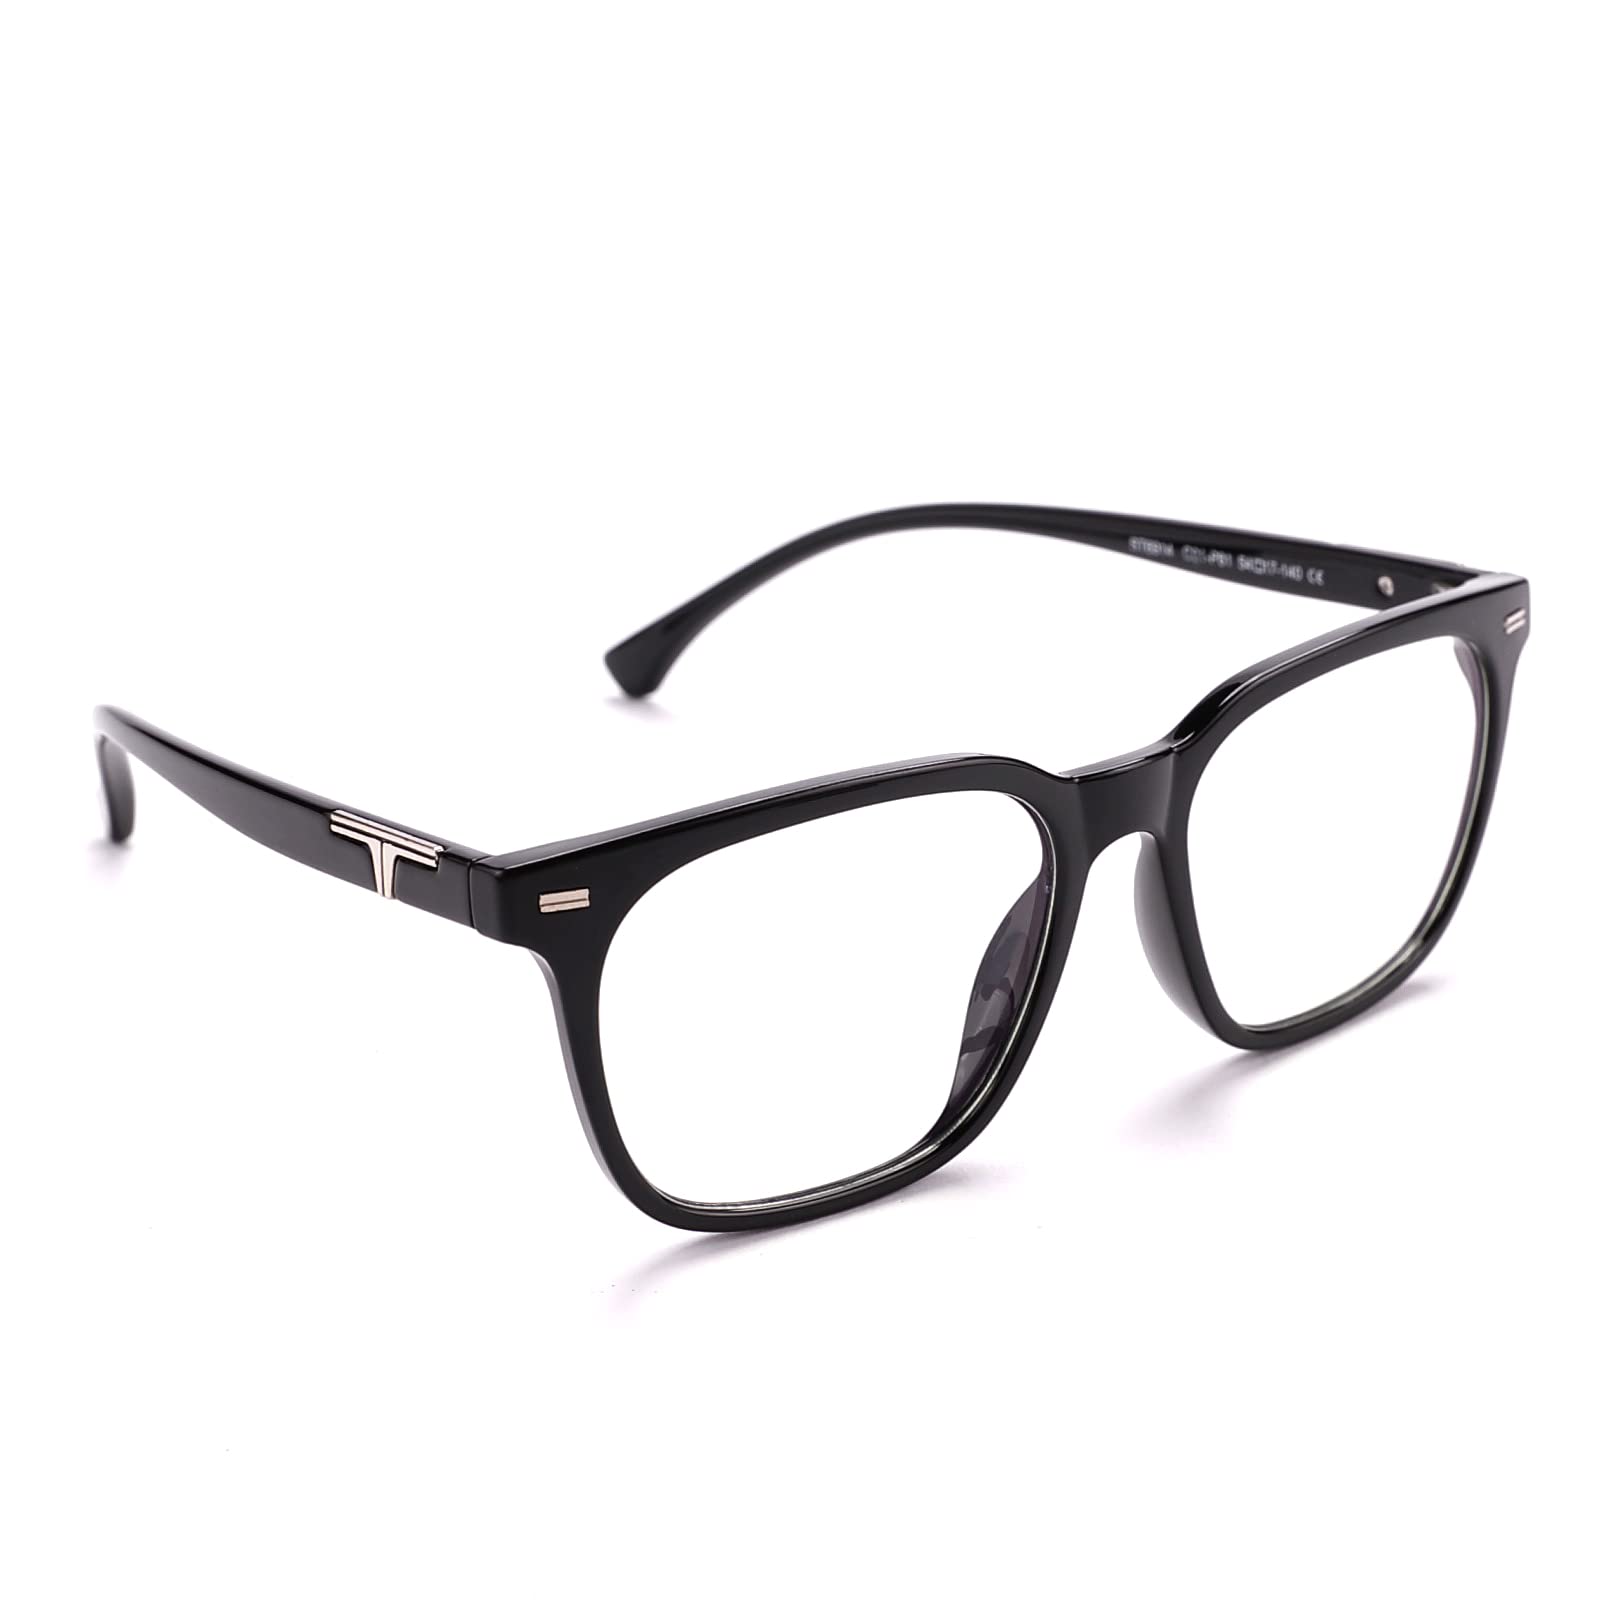 Intellilens Square Blue Cut Computer Glasses for Eye Protection